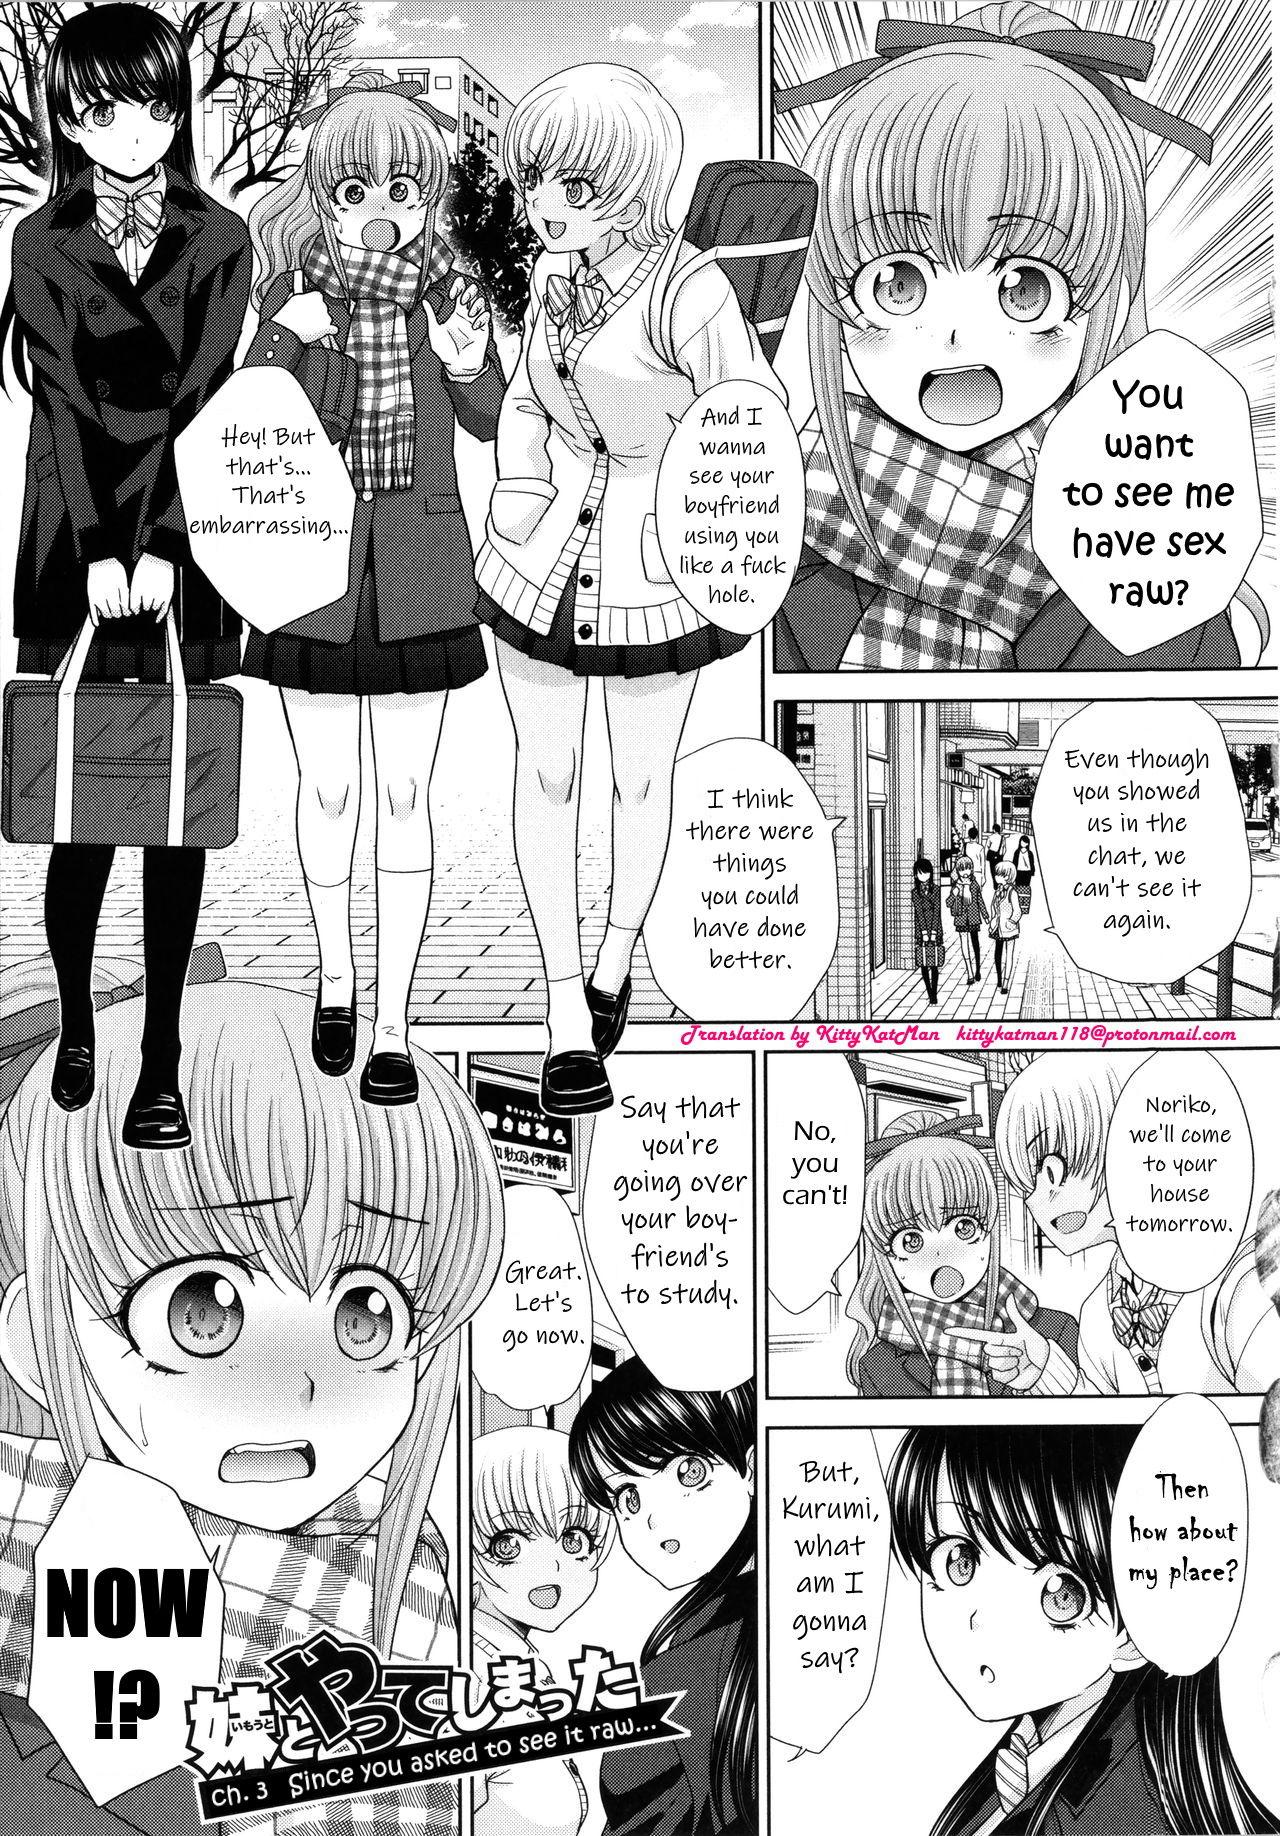 Imouto to Yatte Shimattashi, Imouto no Tomodachi to mo Yatte Shimatta | I had sex with my sister and then I had sex with her friends 34